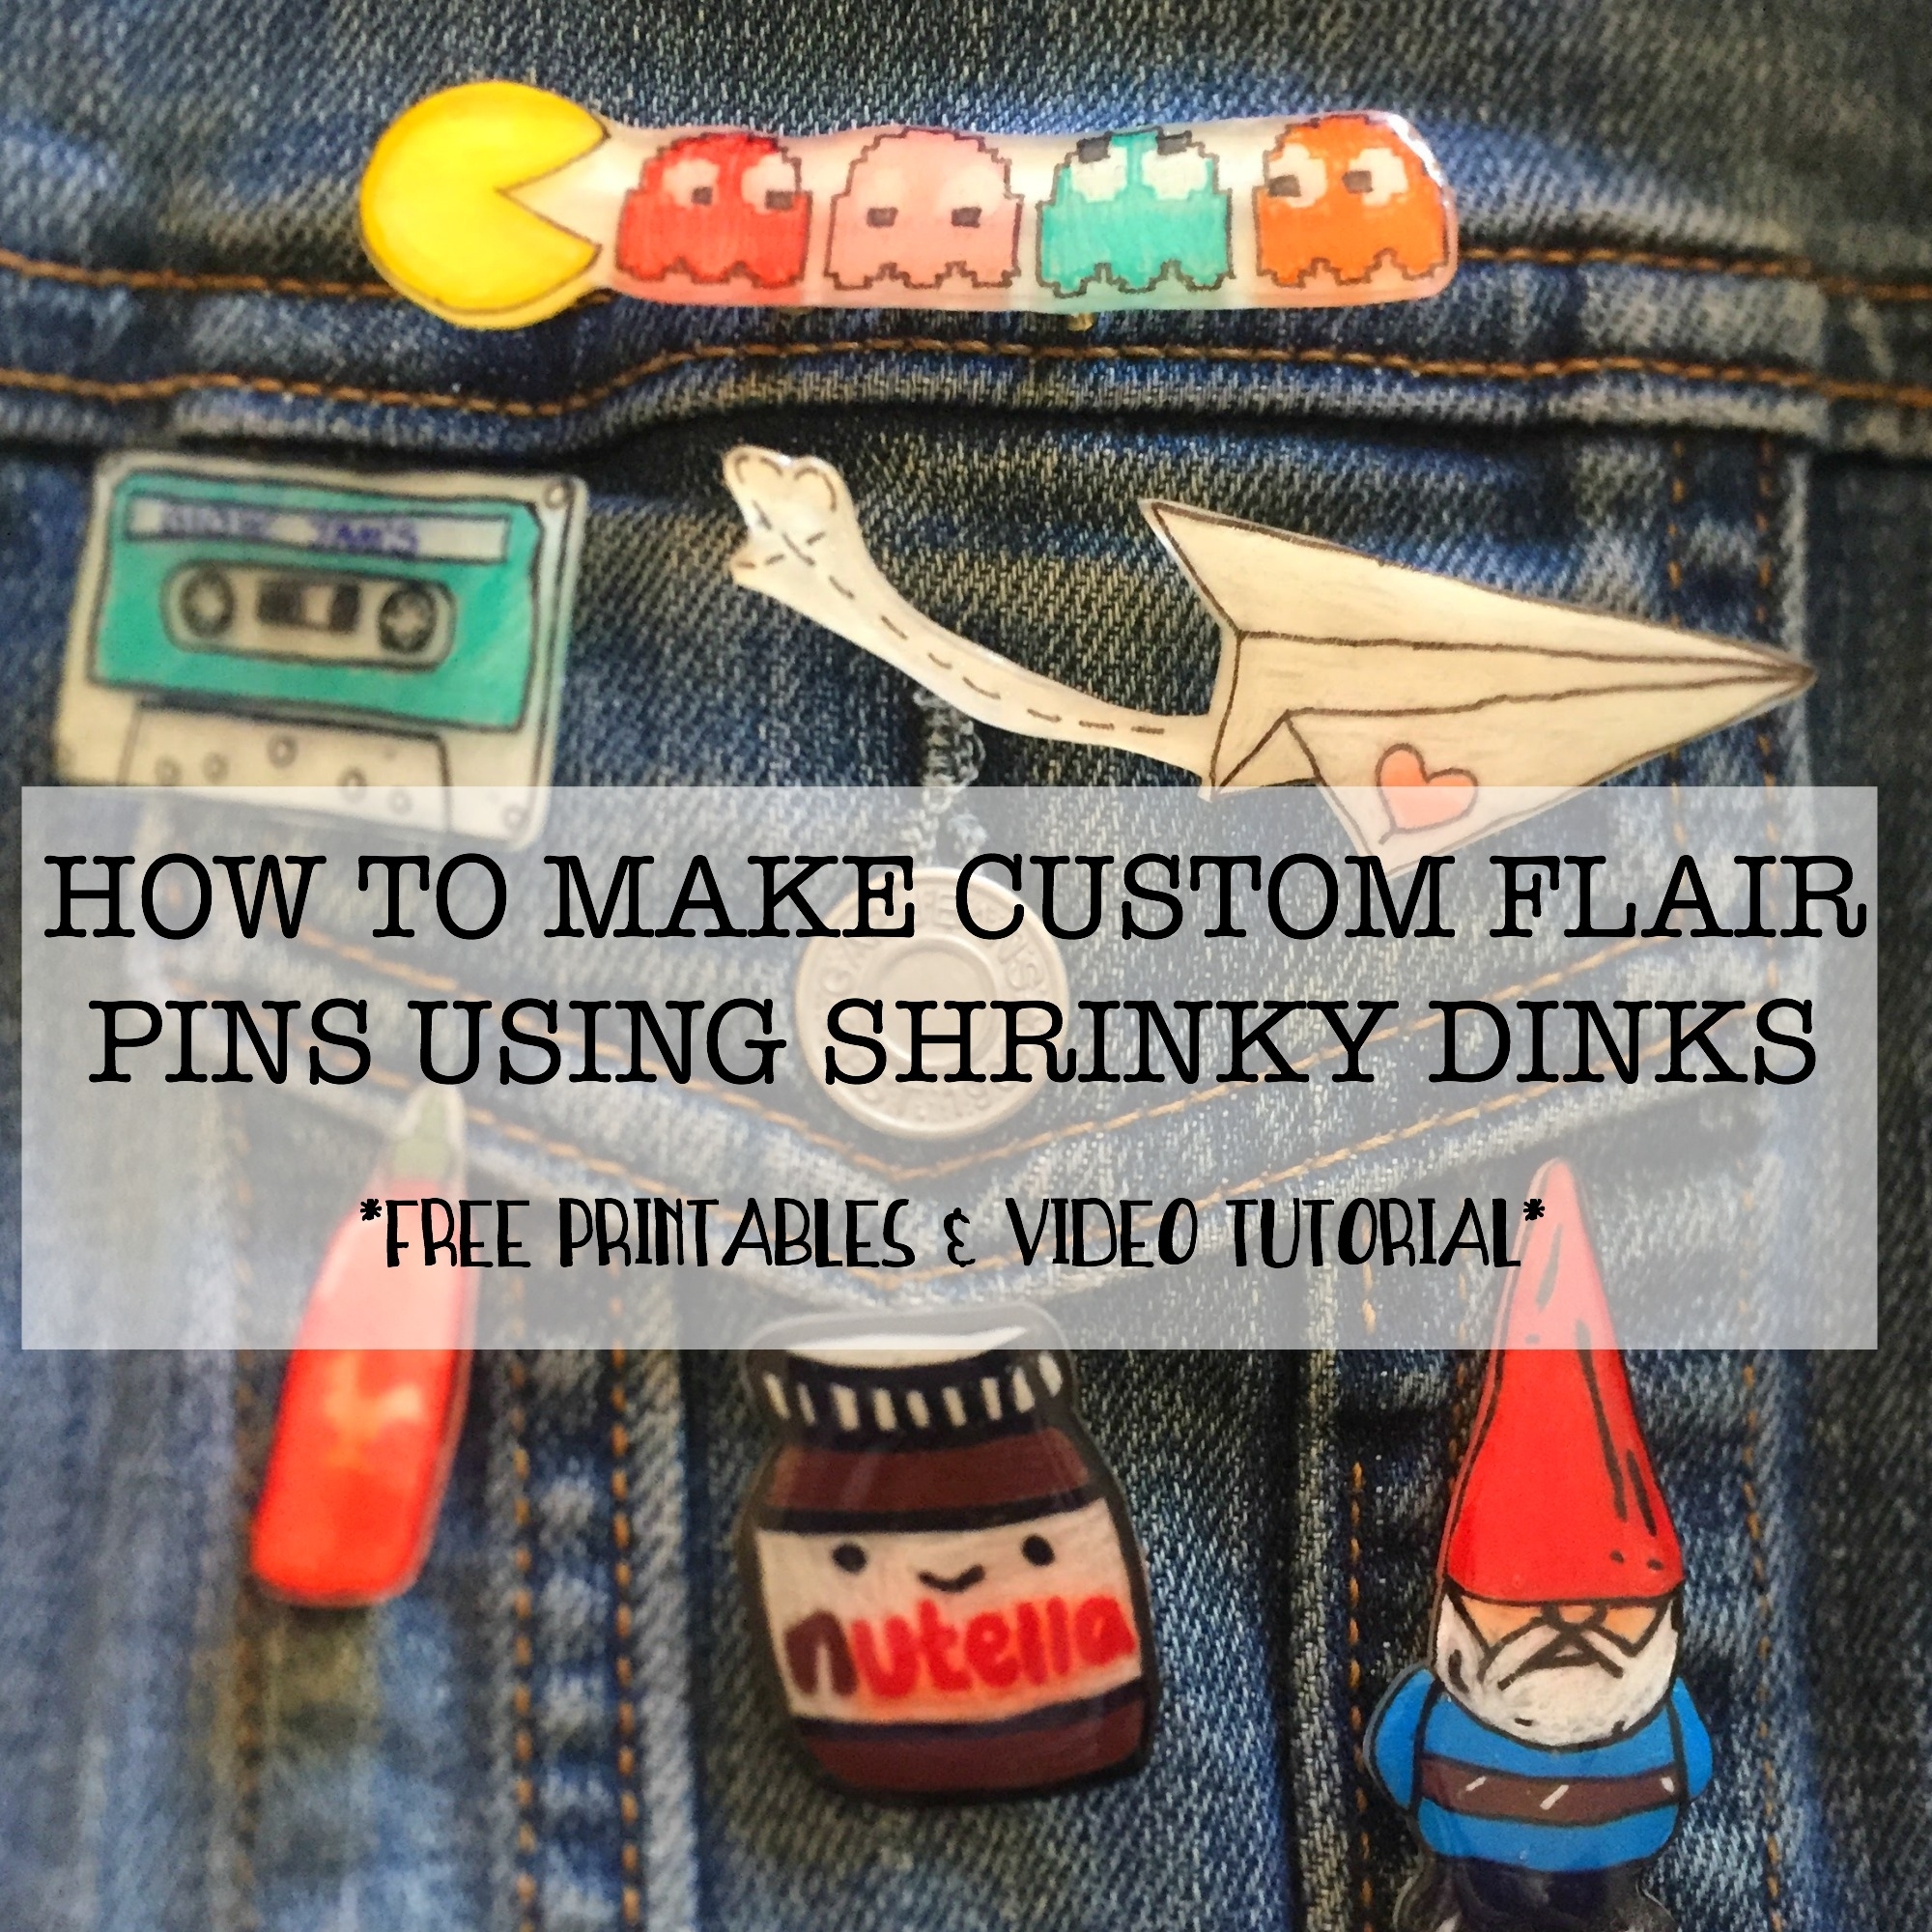 Flair pins made from shrinky dinks